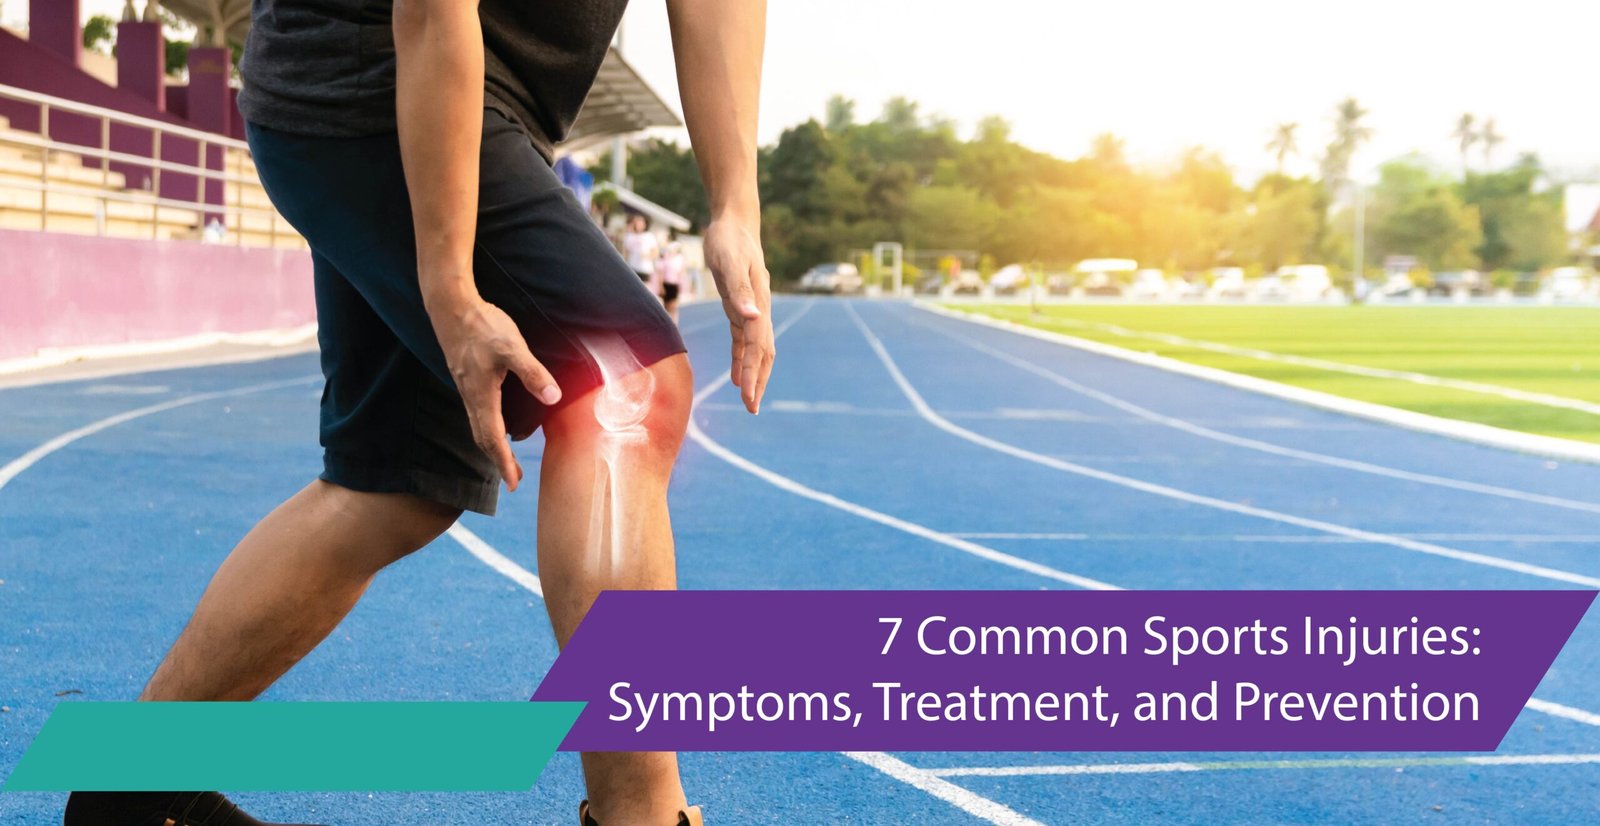 Sports Injuries: Symptoms, Treatment, and Prevention